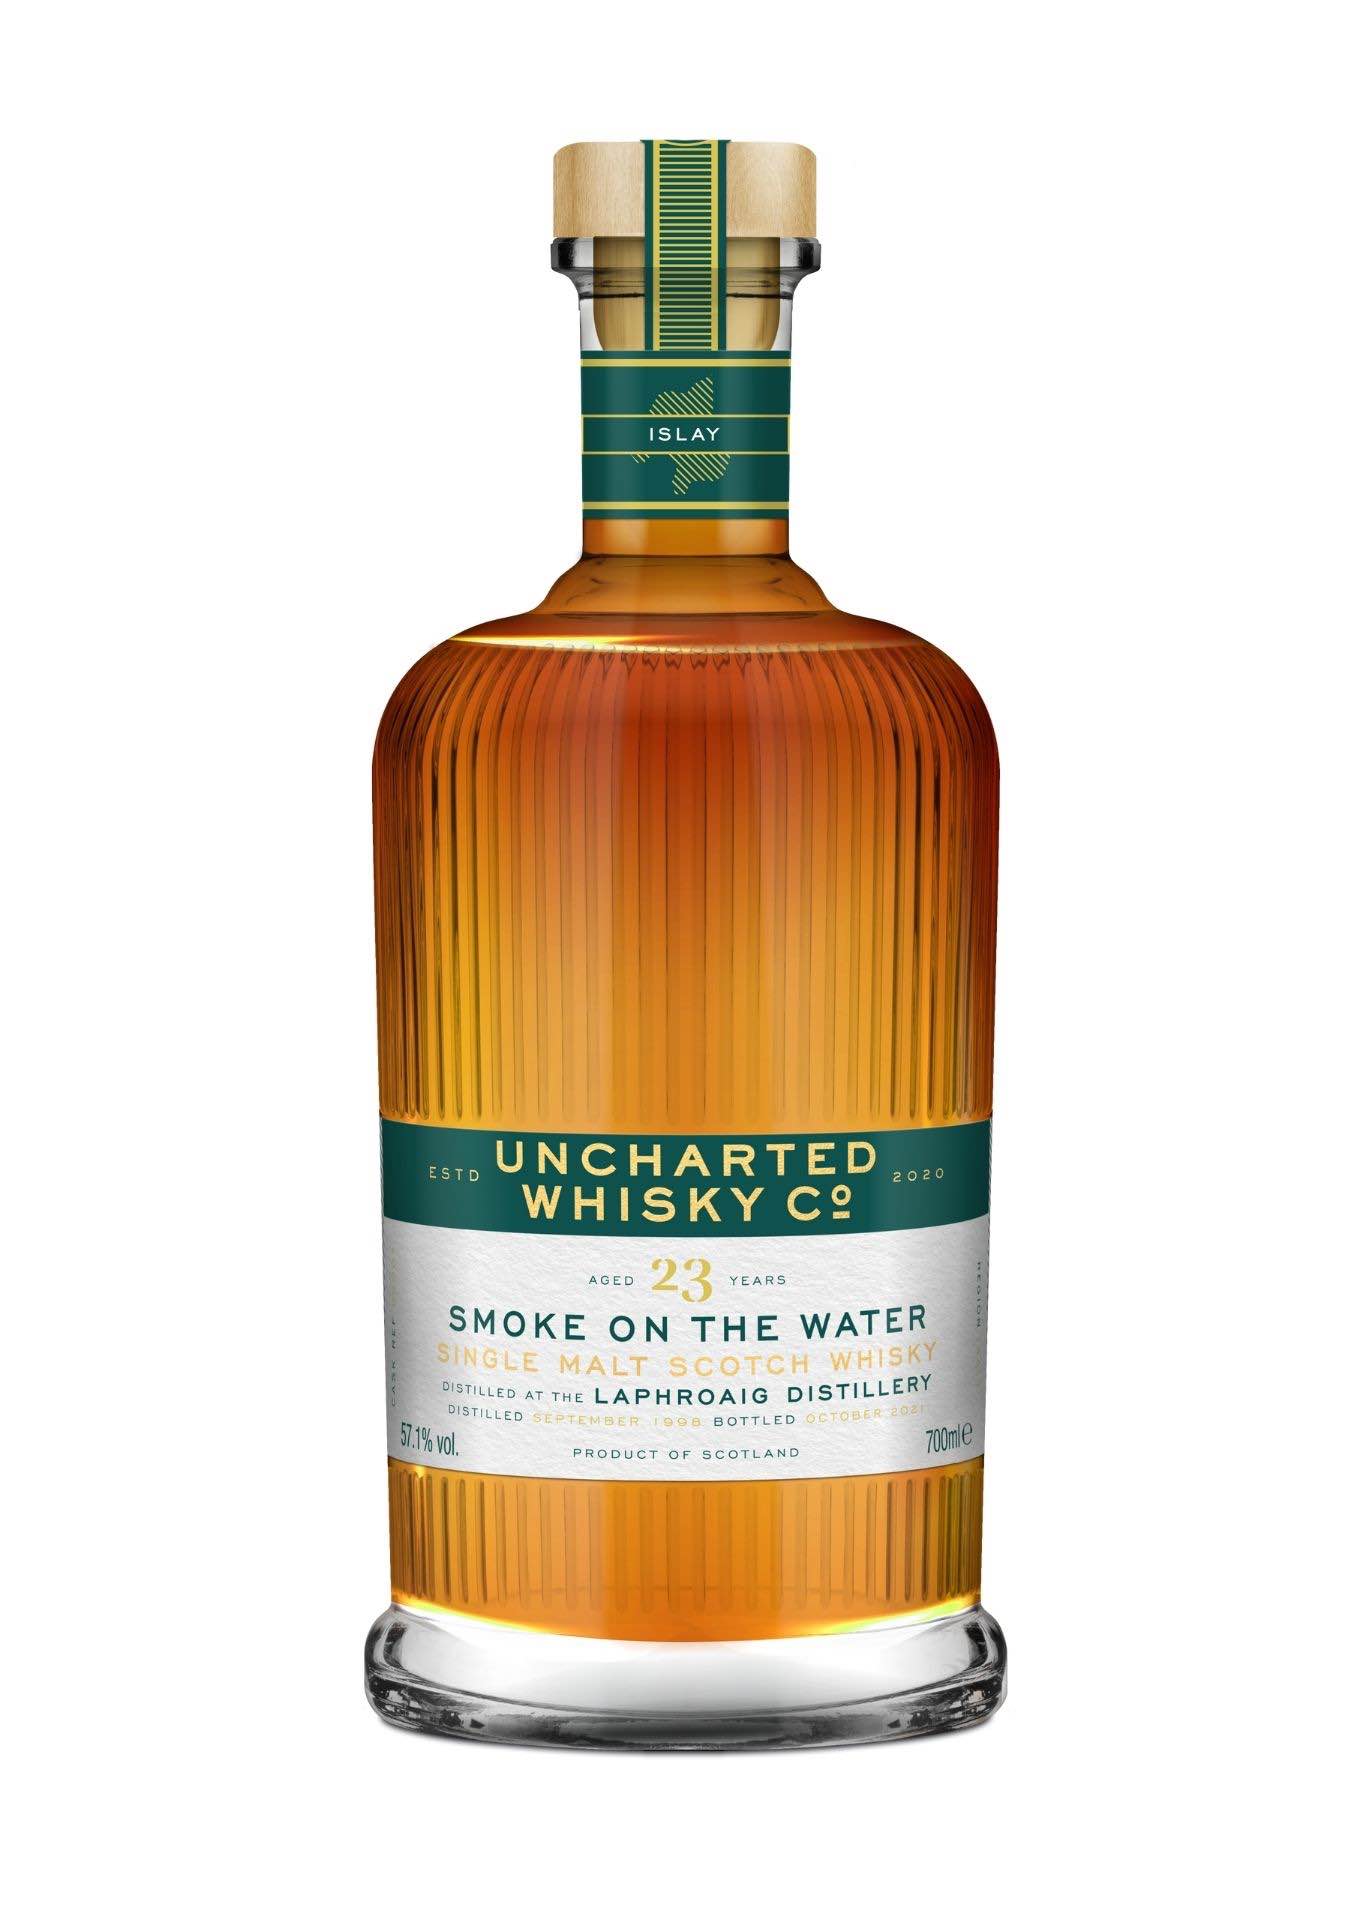 Uncharted Whisky, Smoke On The Water, Laphroaig 23 Year Old